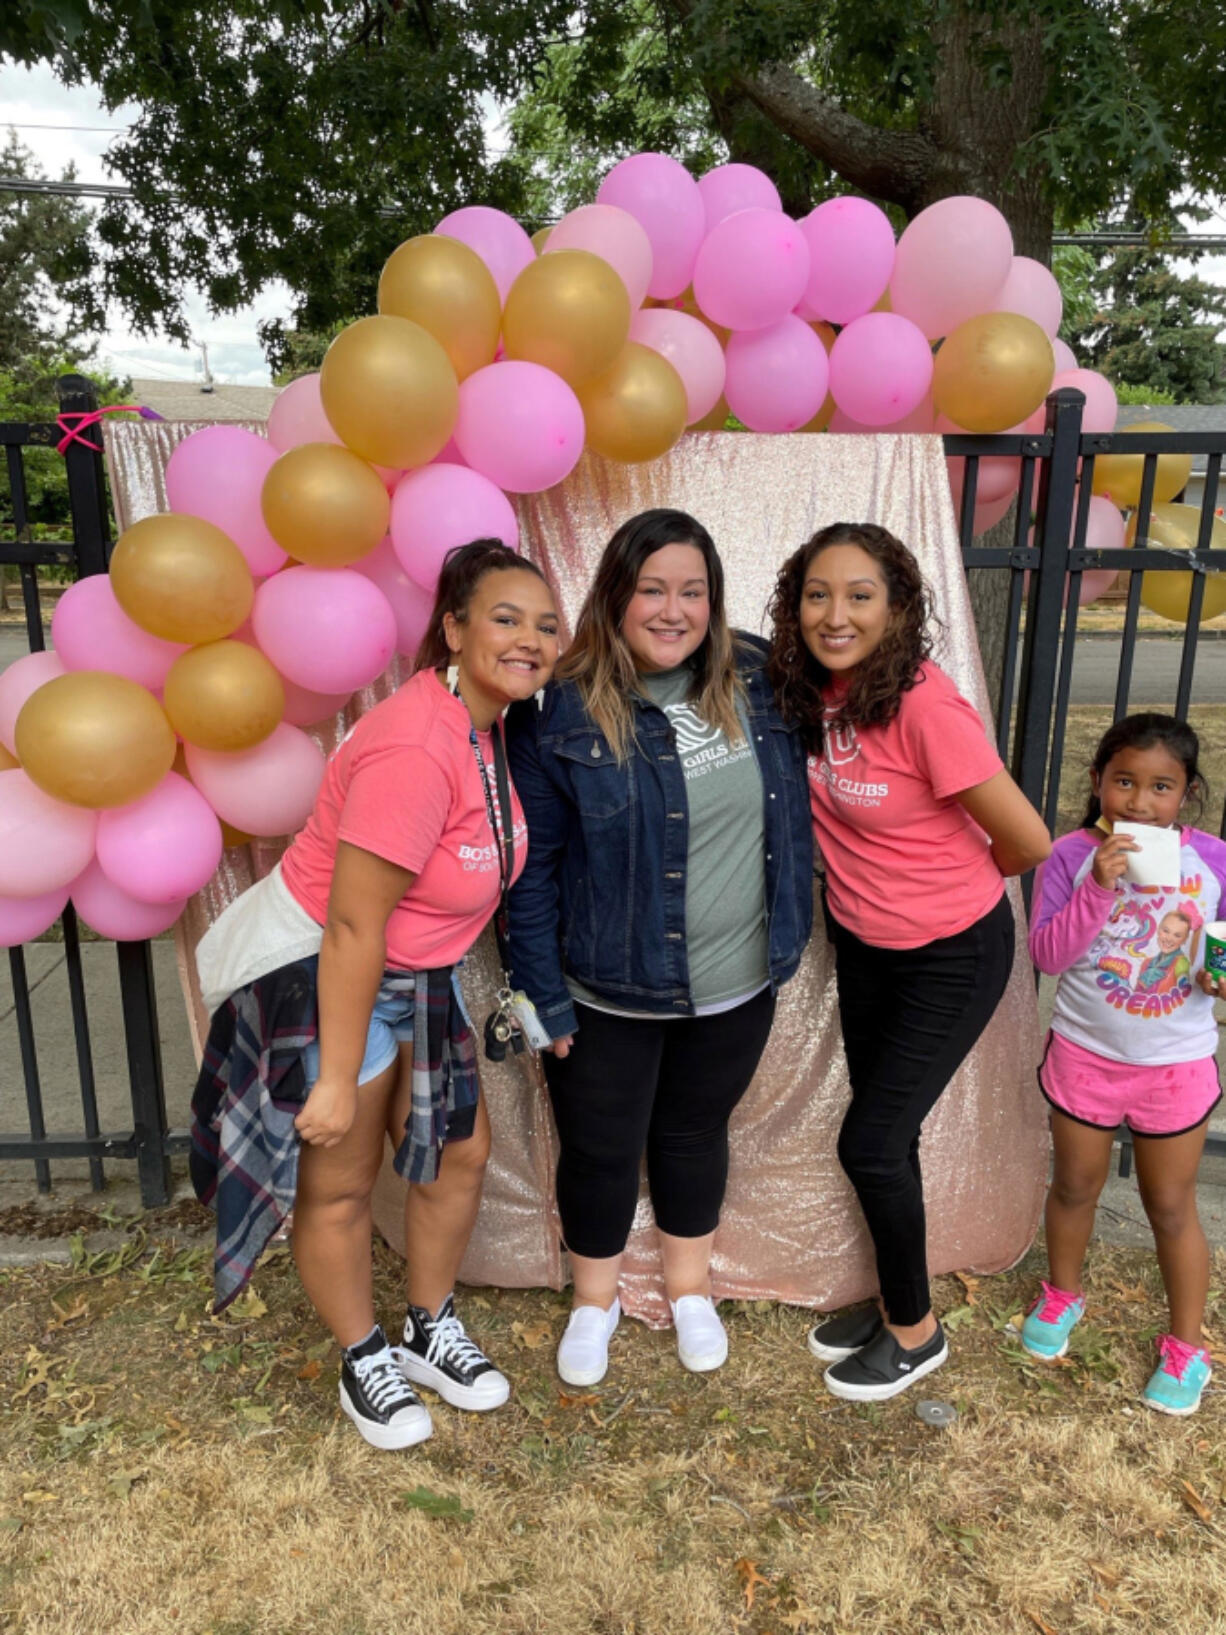 ROSE VILLAGE: Ashley Jones, center, poses for a photo with Boys & Girls Clubs Washington Elementary Club employees Mikaela Bolds, left, and Maria Ramirez, right, and club member Rolynda, far right.